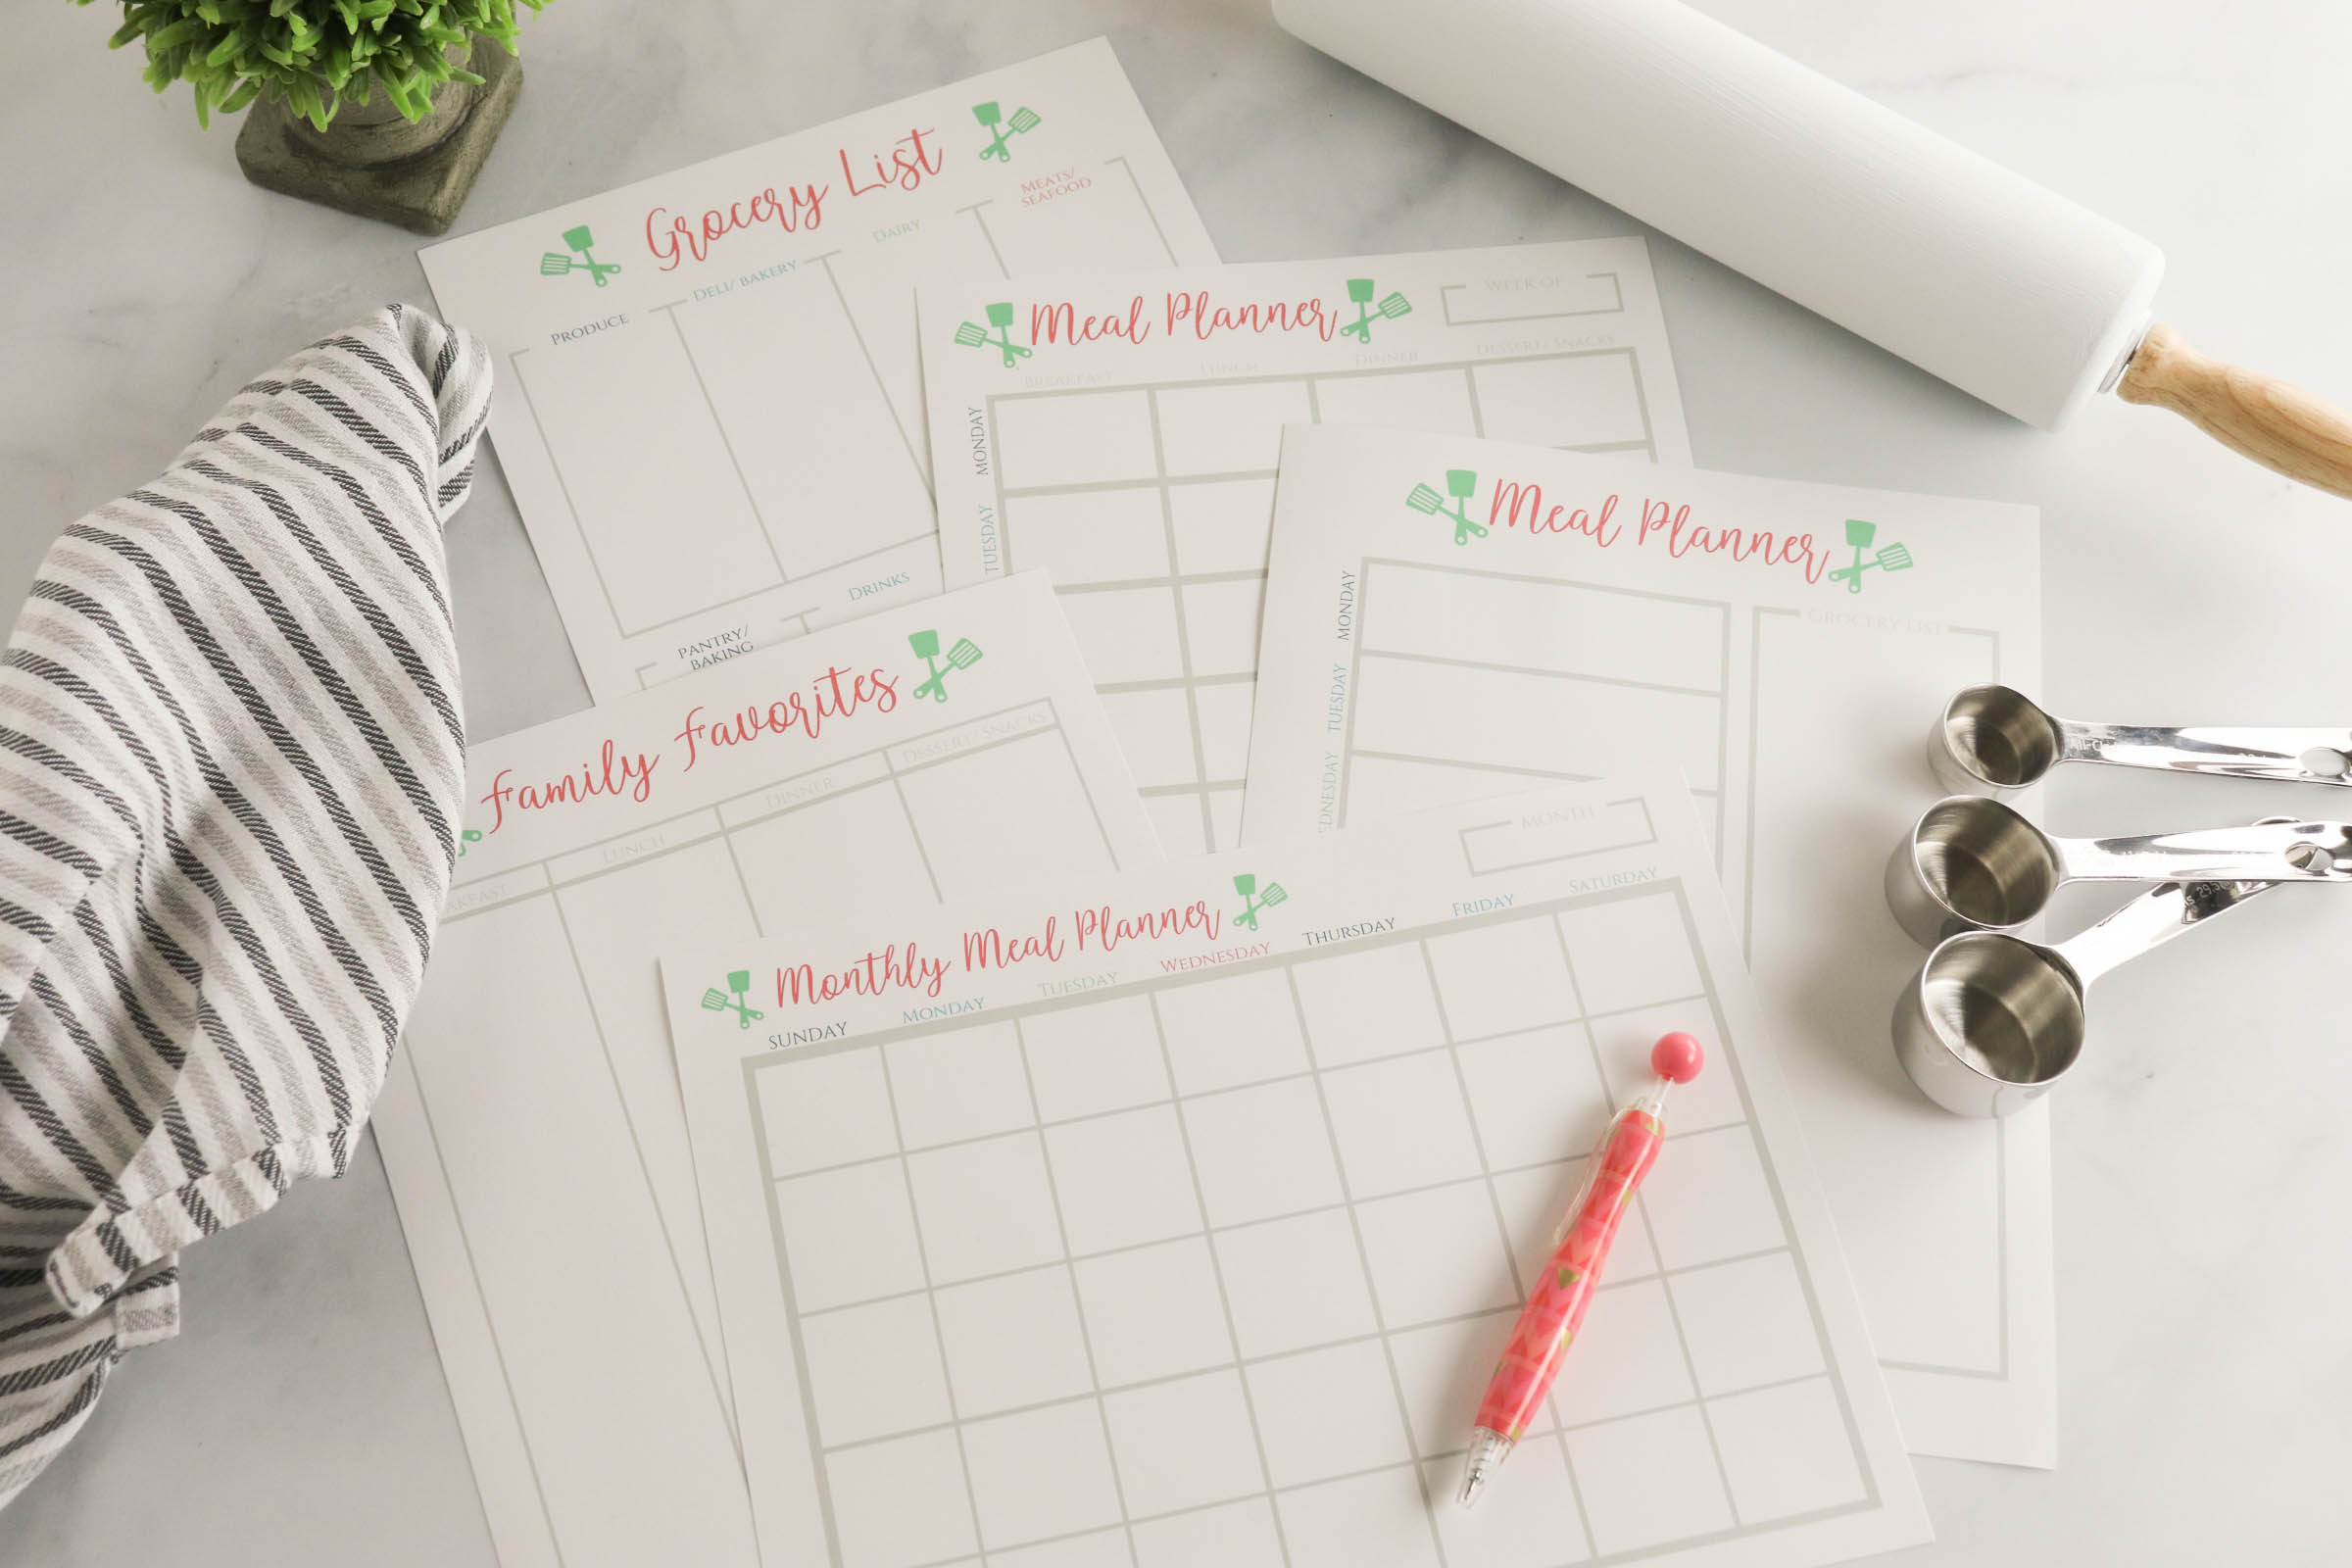 Meal planner printables with measuring spoons, pen, dishcloth and rolling pin.